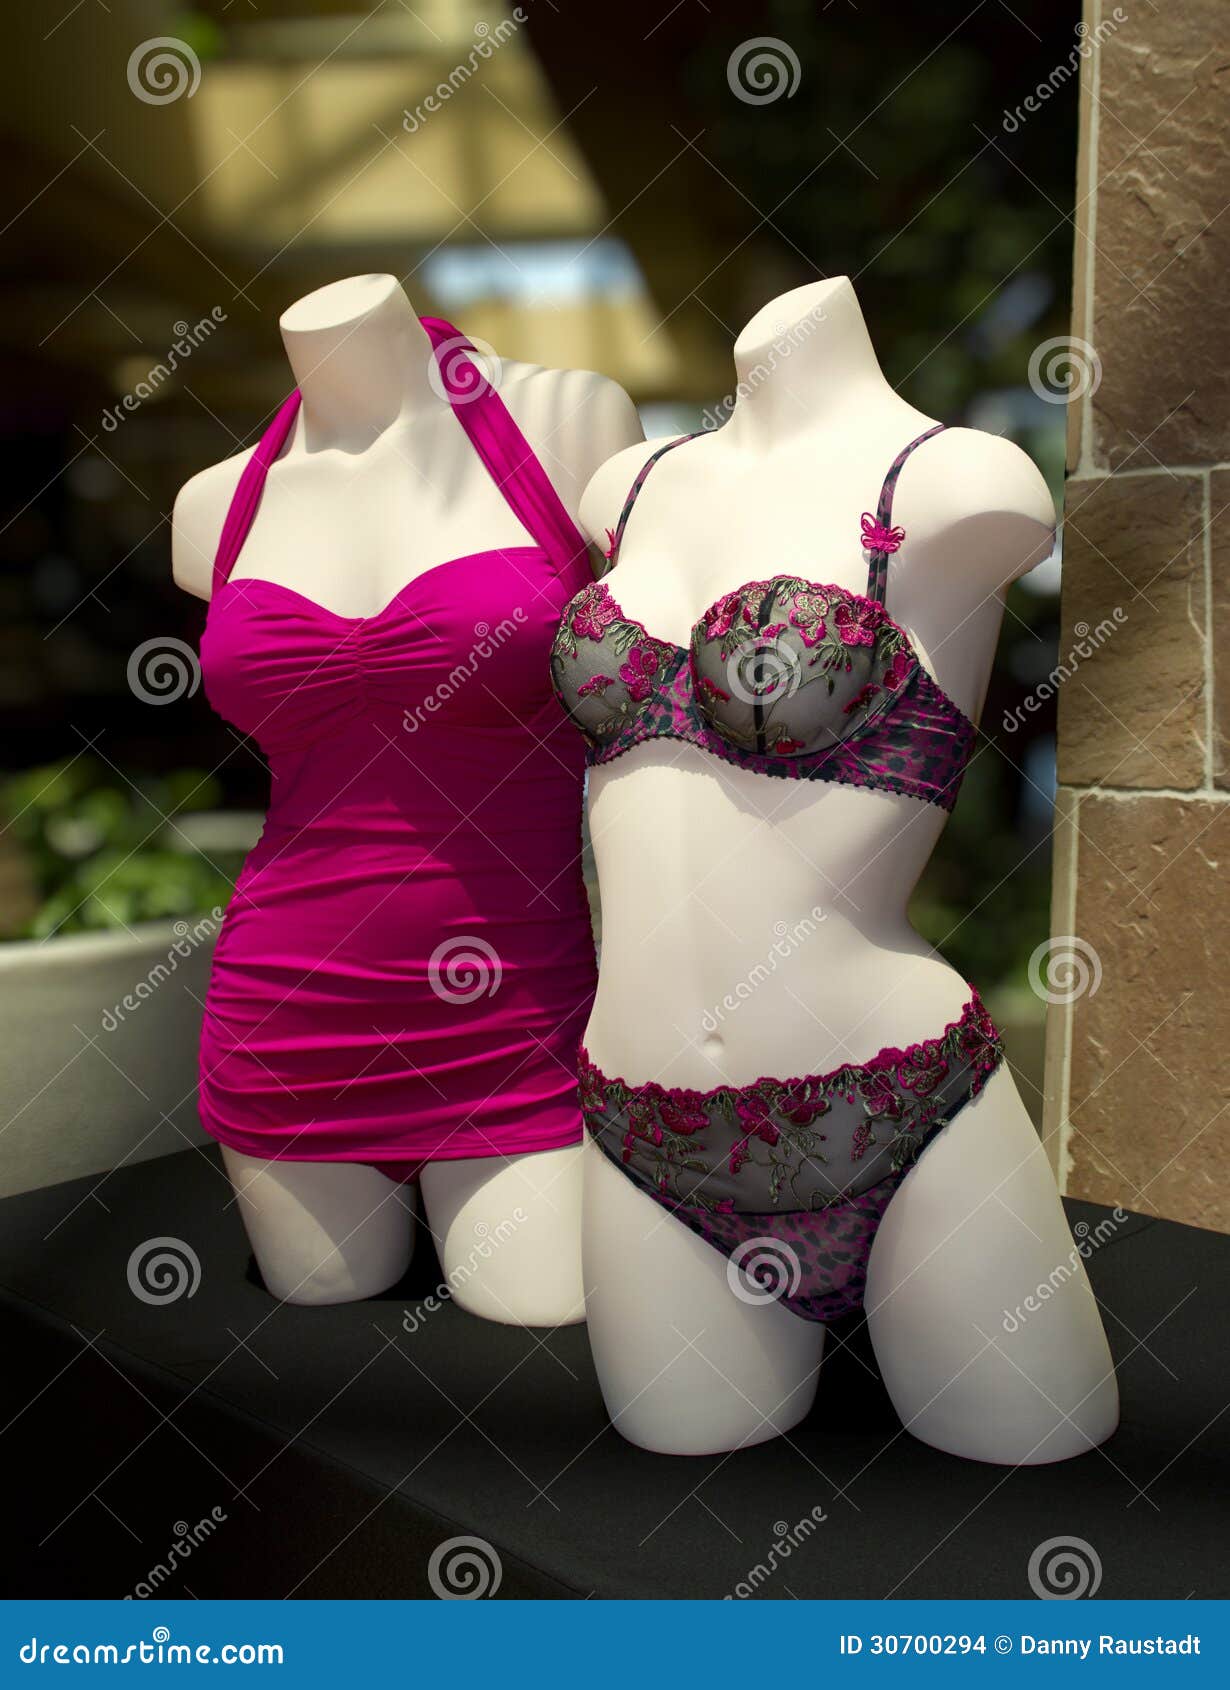 how womens two piece outfits xbox one